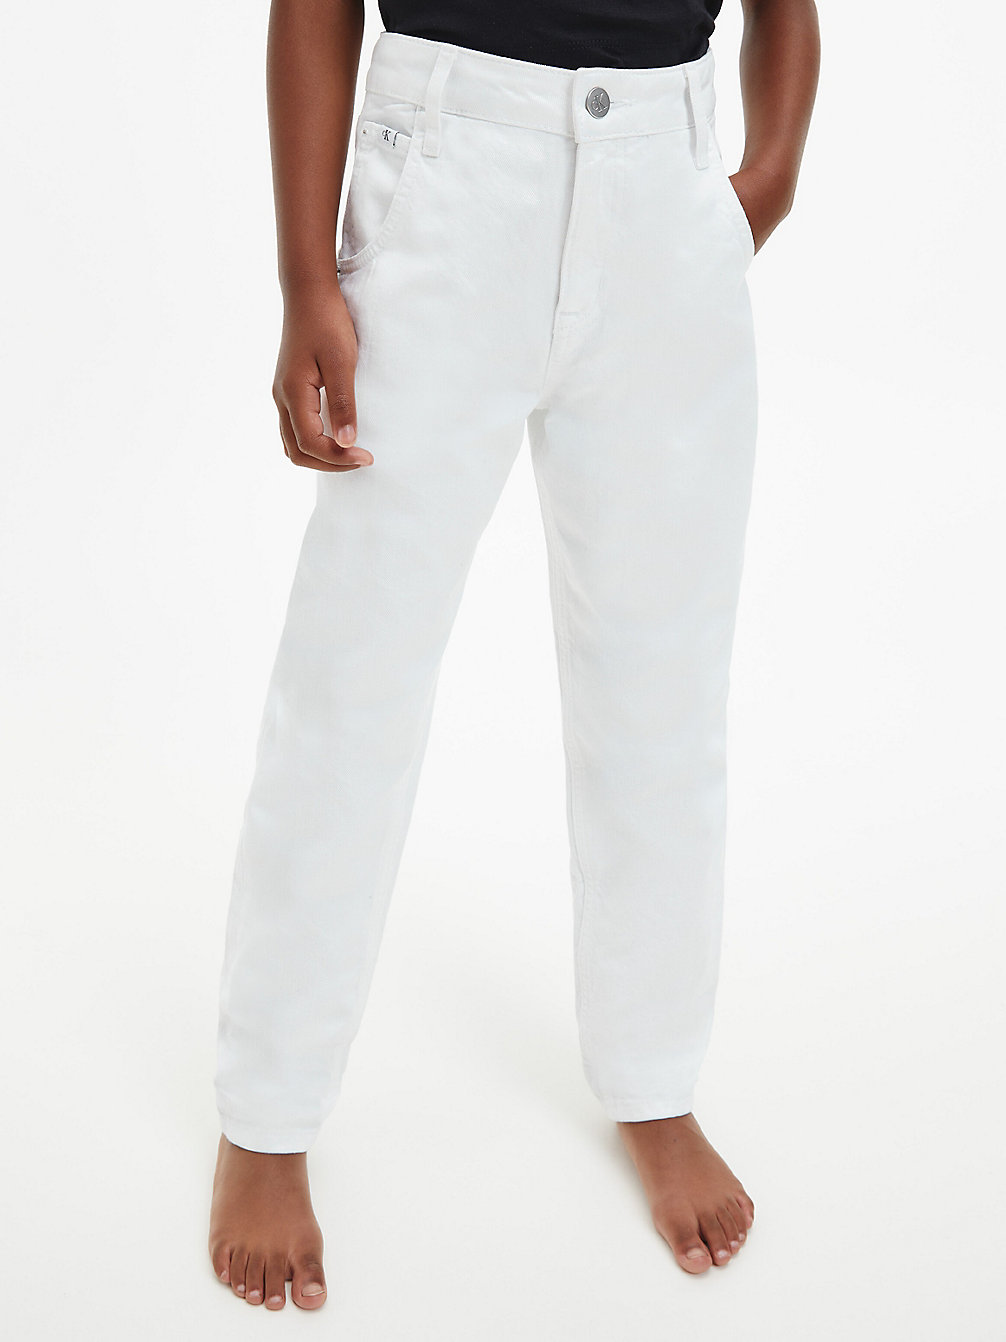 WHITE CLEAR COATED Coated Barrel Leg Jeans undefined girls Calvin Klein